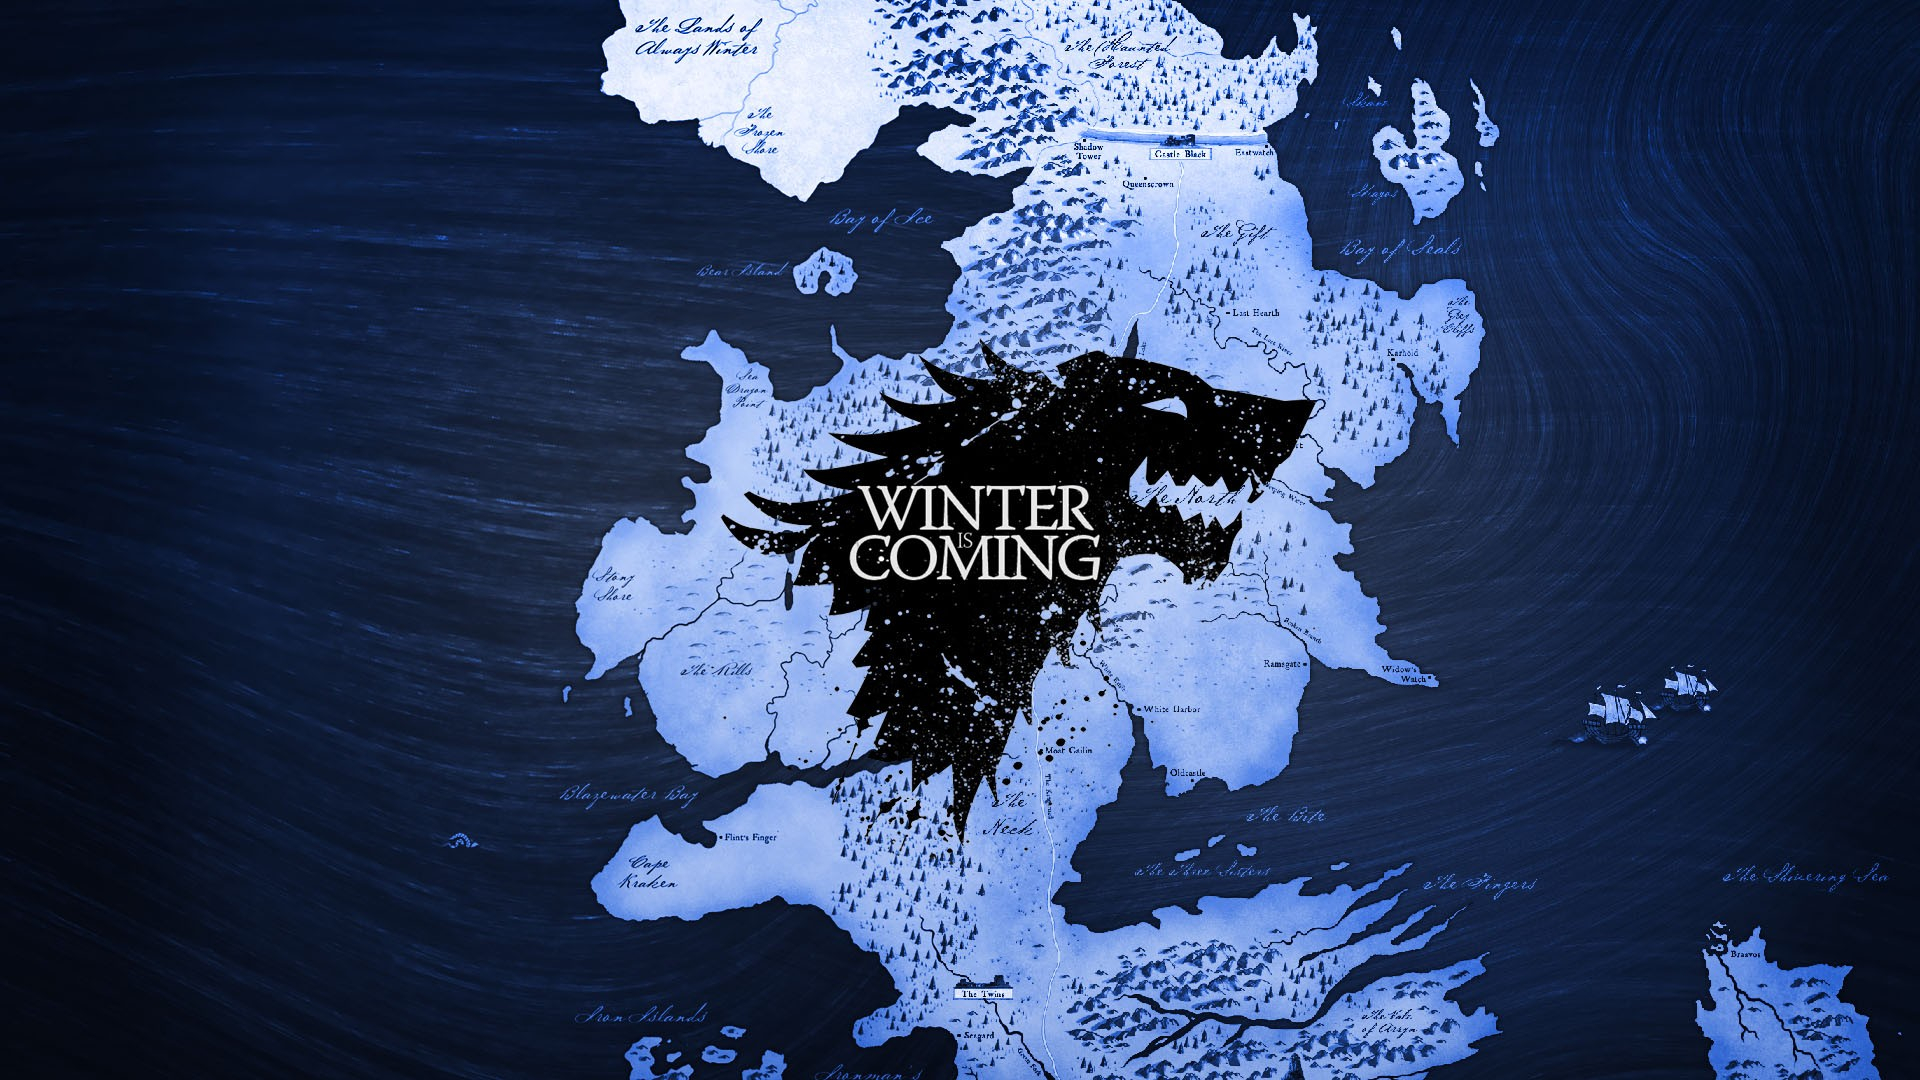 1920x1080 Wallpaper : illustration, reflection, Earth, blue, Game of Thrones, Winter Is Coming, darkness, px, computer wallpaper 4kWallpaper 564380 HD Wallpapers